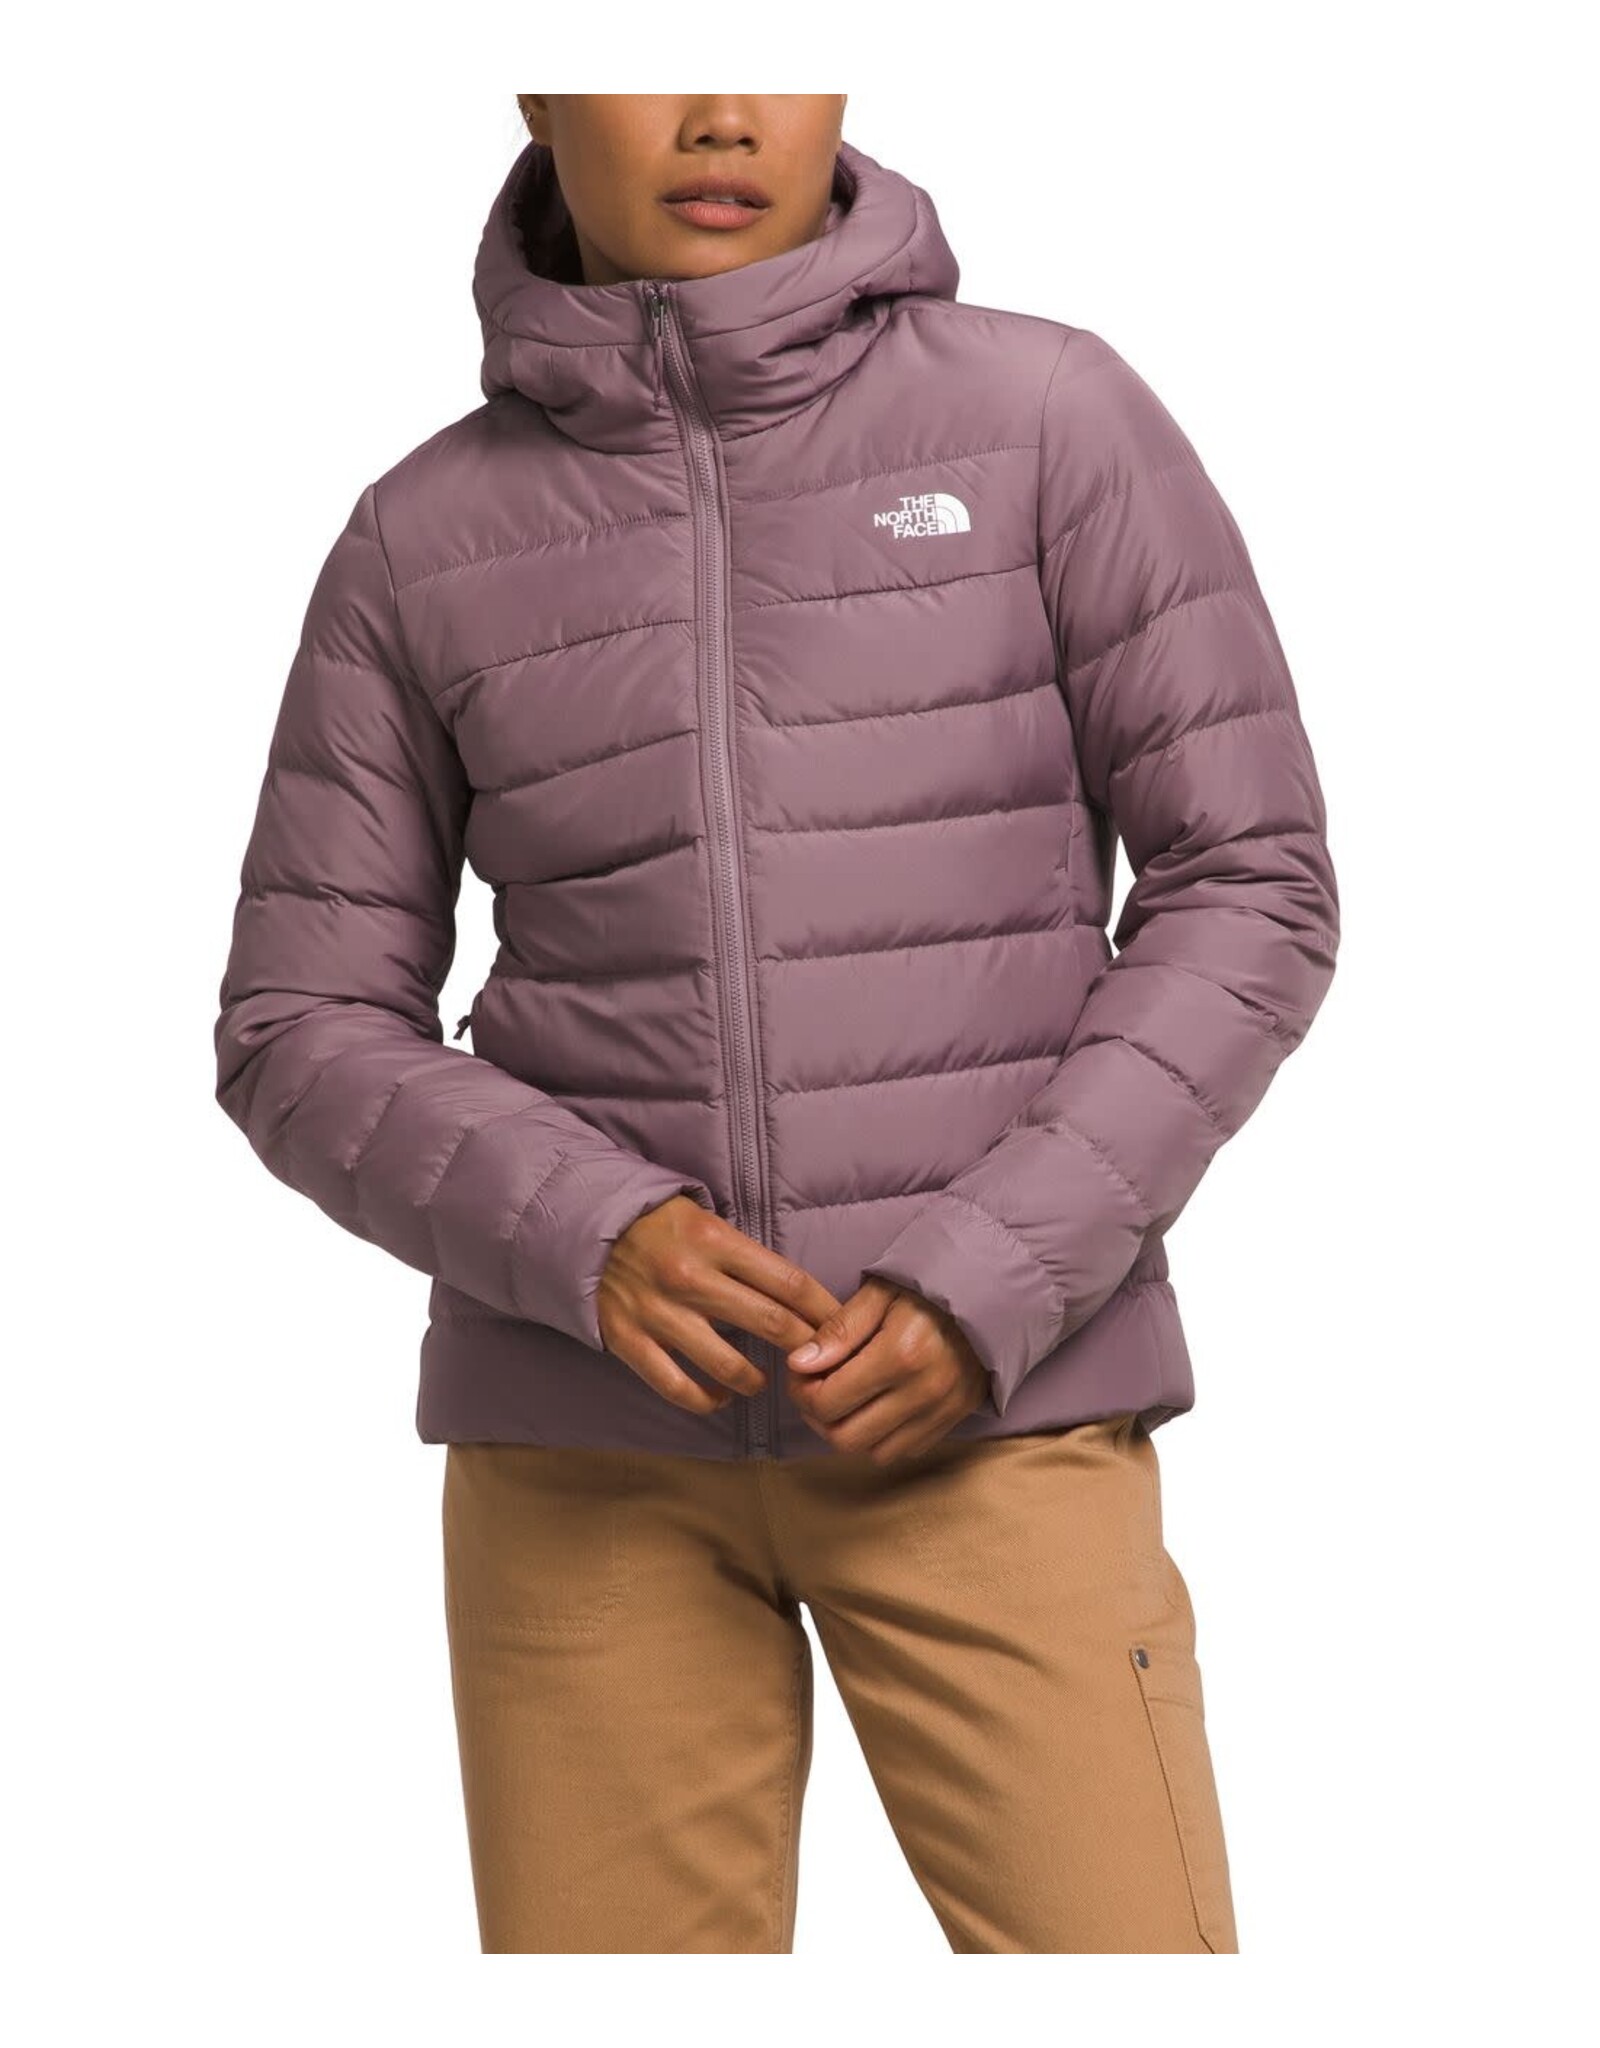 THE NORTH FACE WOMEN'S ACONCAGUA 3 HOODIE